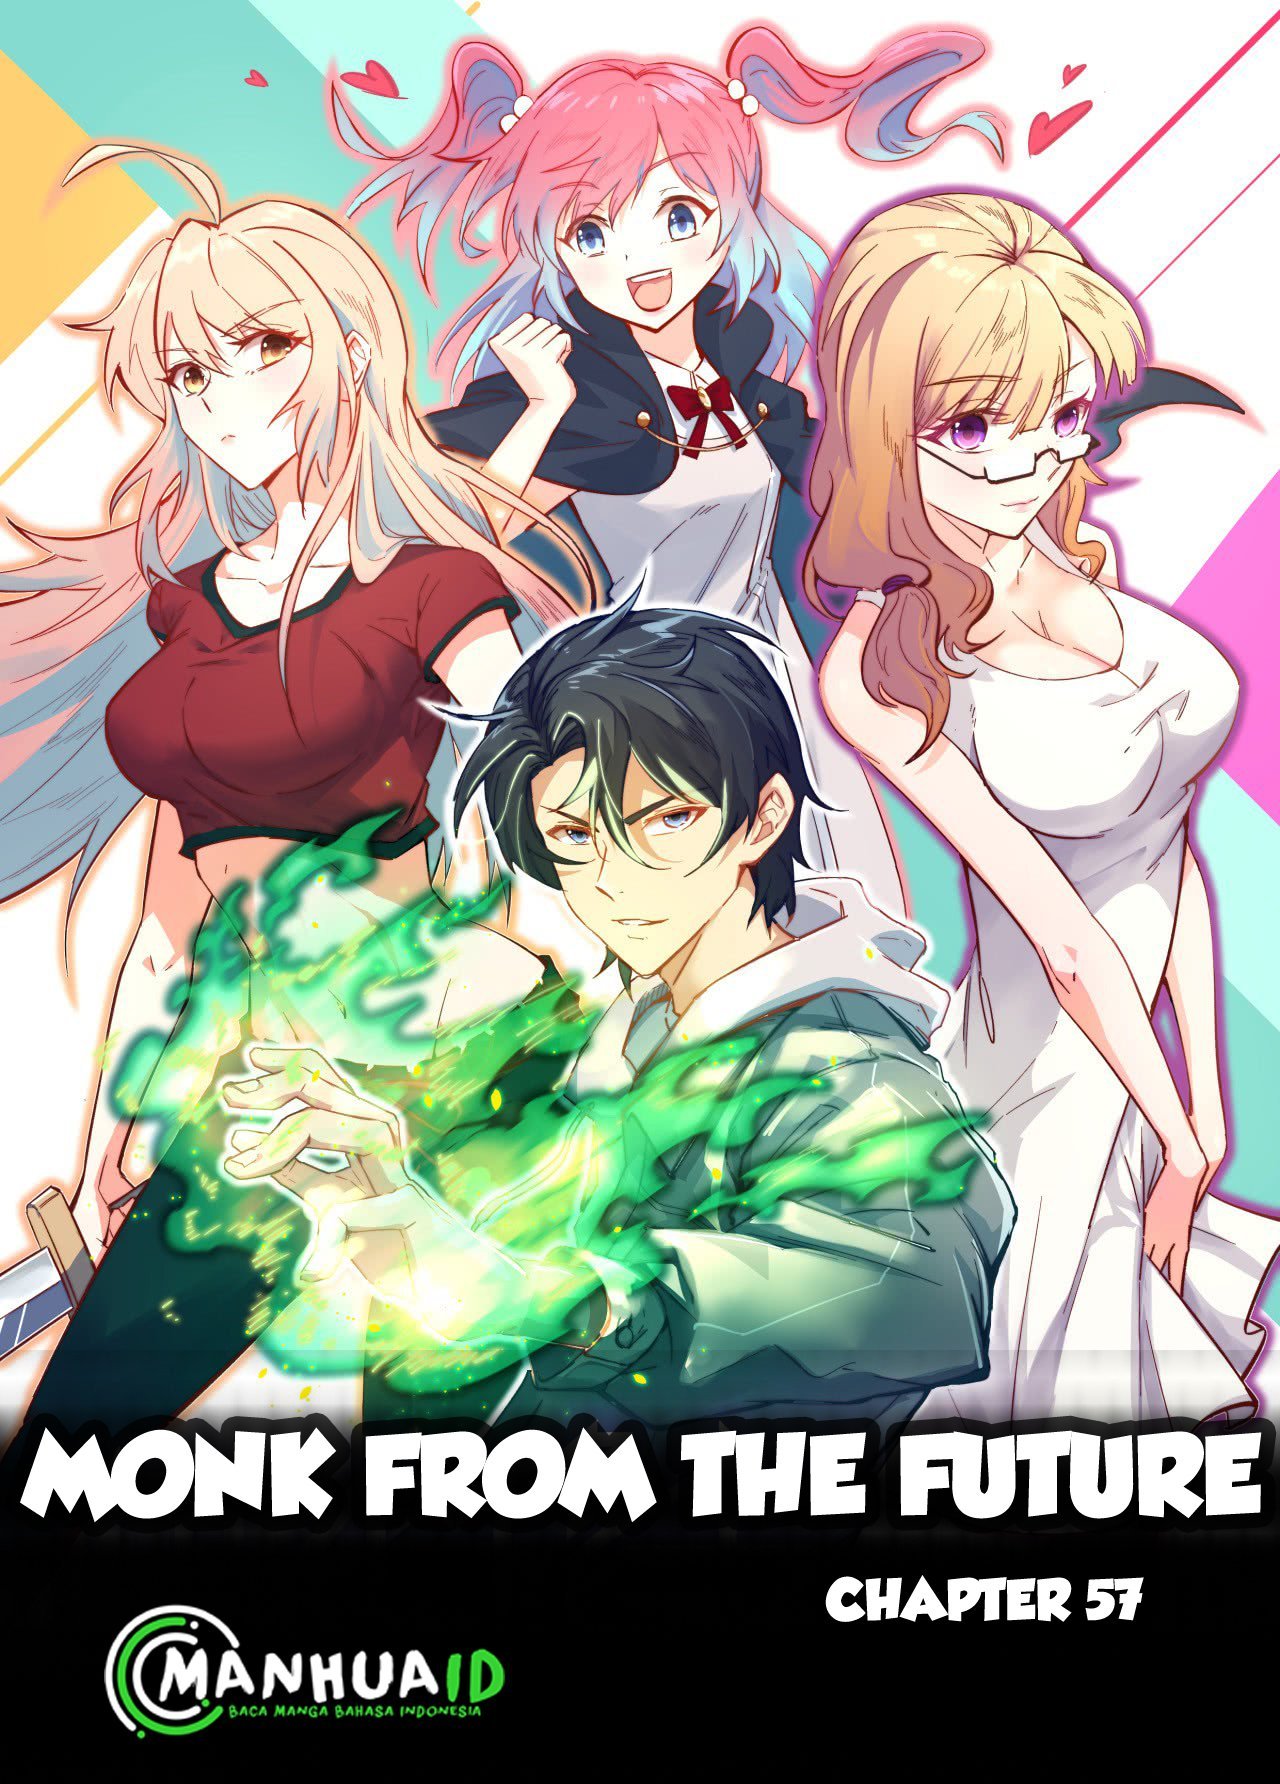 Monk From the Future Chapter 57